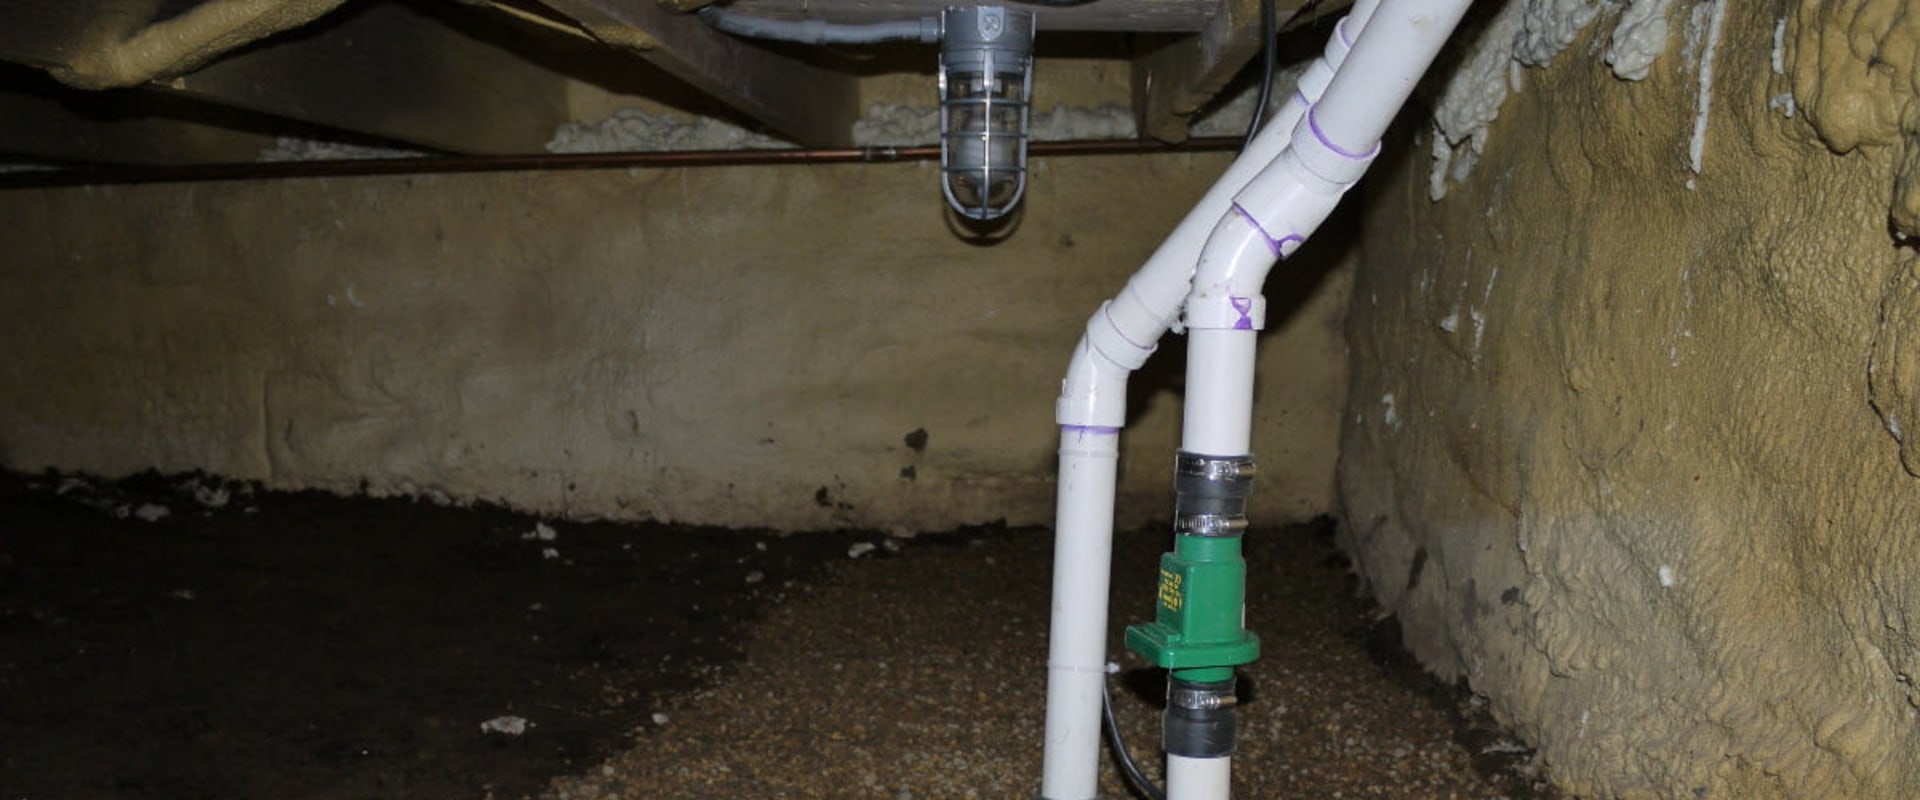 Installing Sump Pumps and Water Filtration Systems